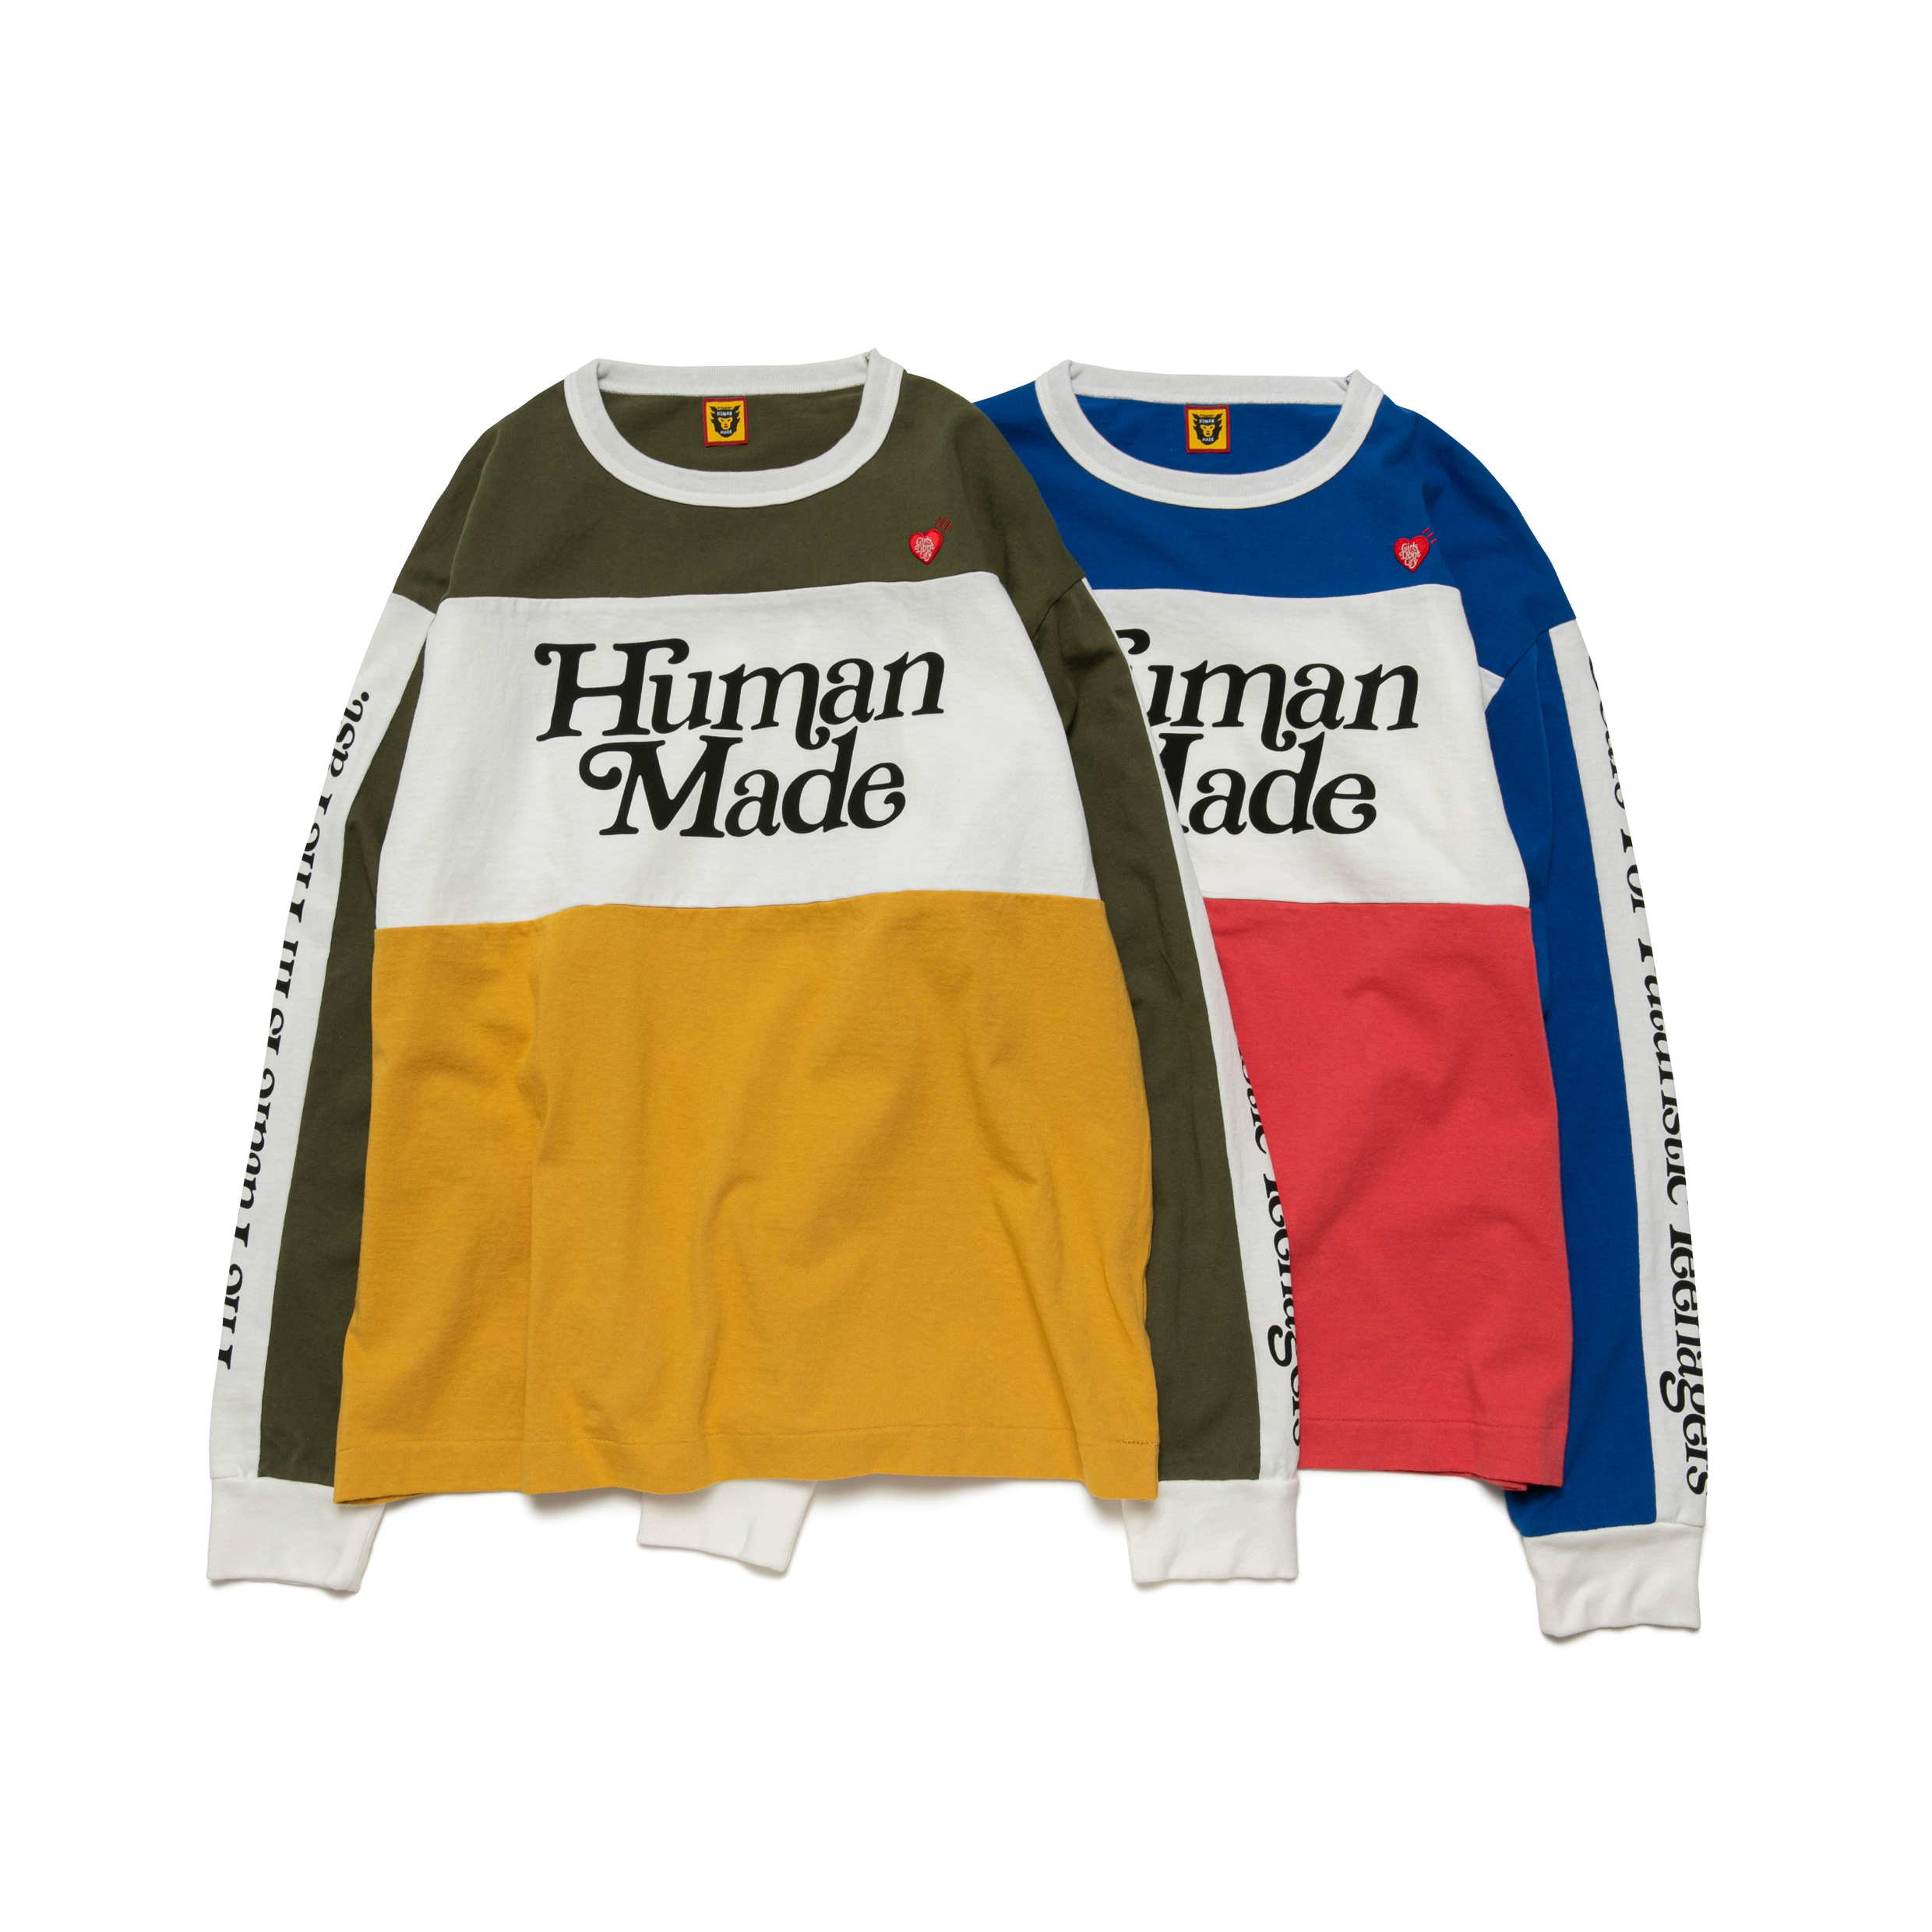 HUMAN MADE x VERDY Product Release | HUMAN MADE Inc.